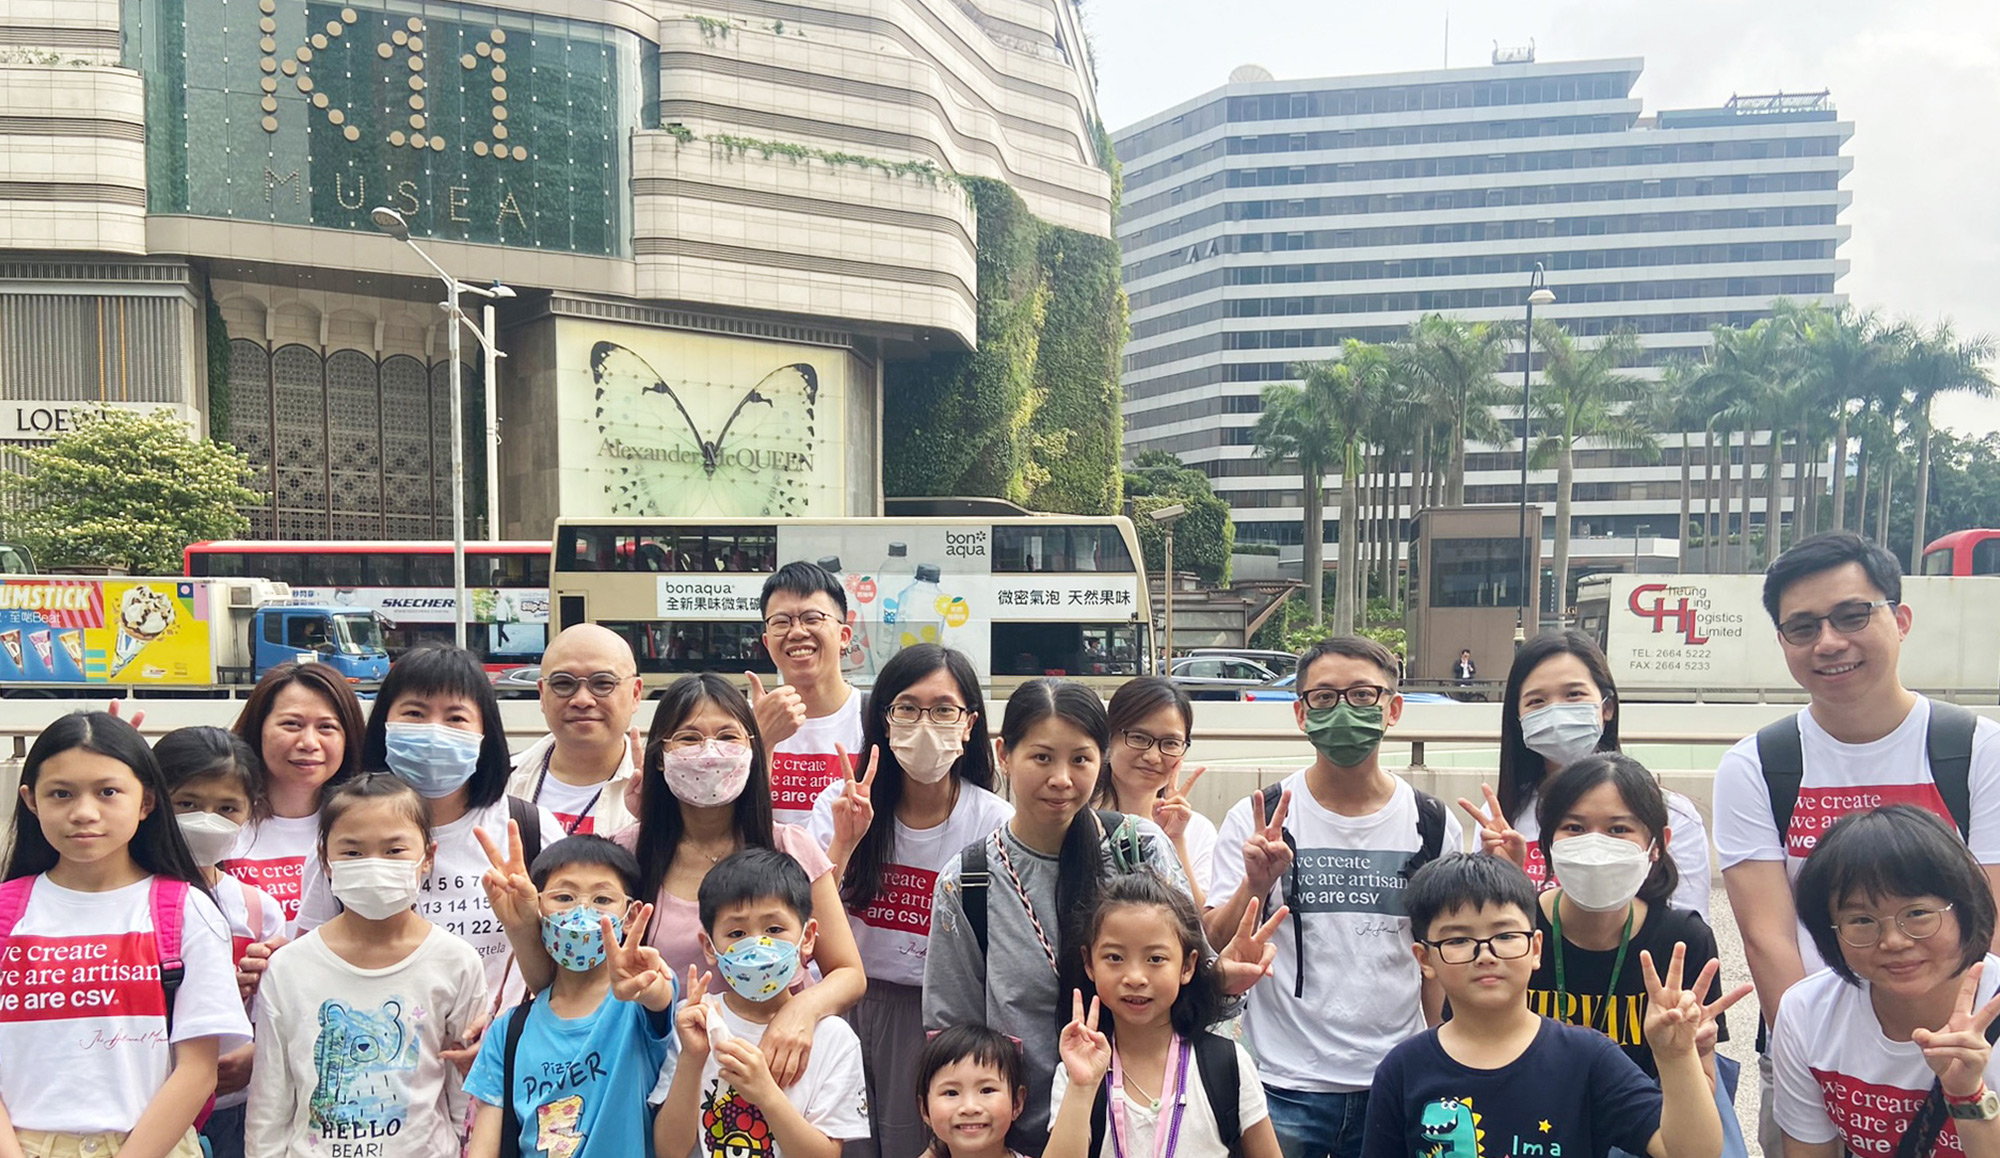 The New World Group Volunteer Team led grassroots families on a journey to explore and learn about Tsim Sha Tsui